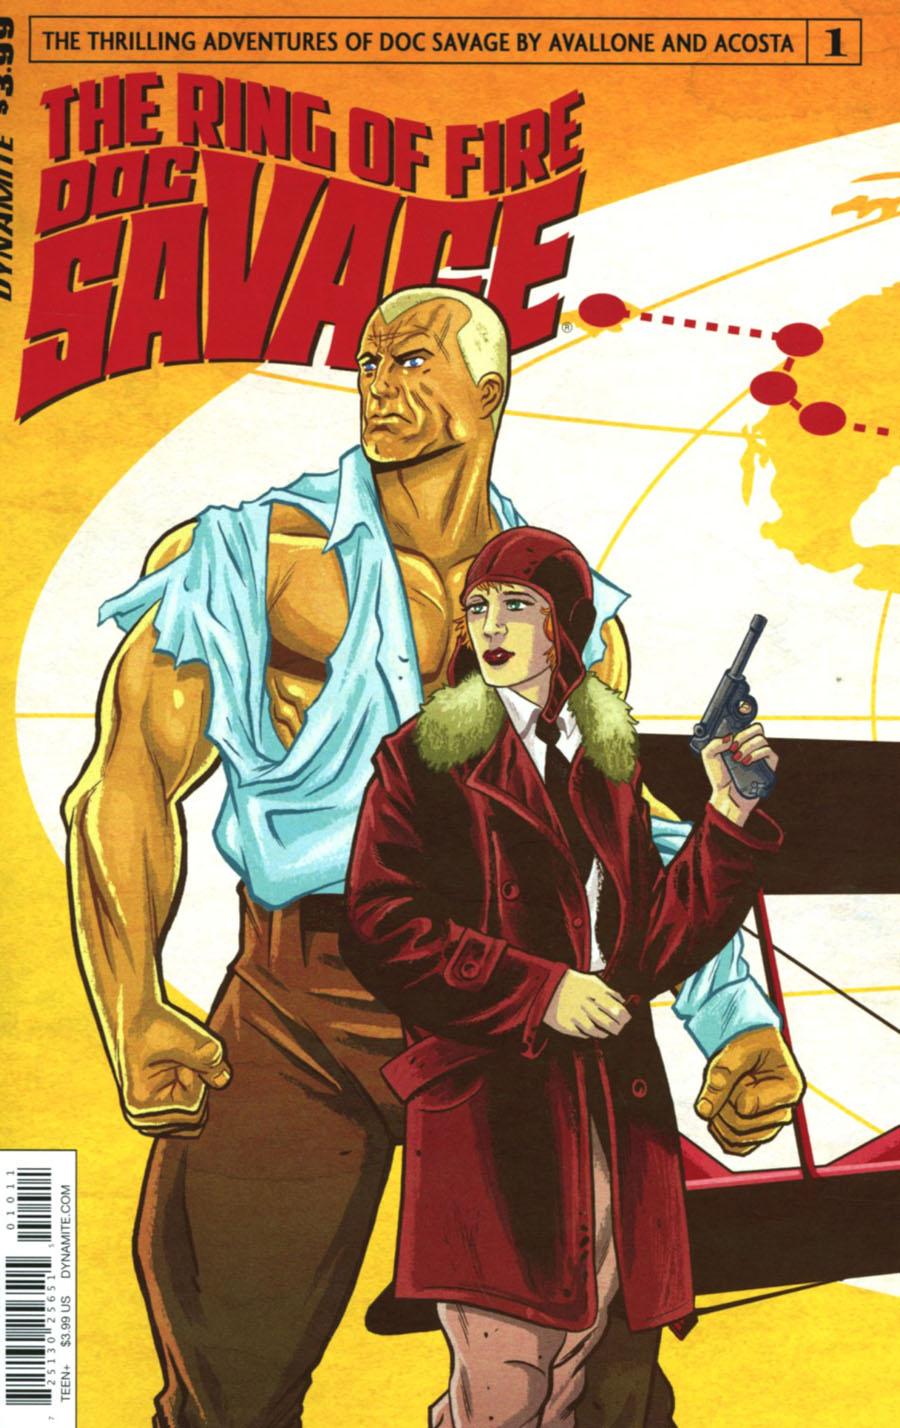 Doc Savage Ring Of Fire Vol. 1 #1